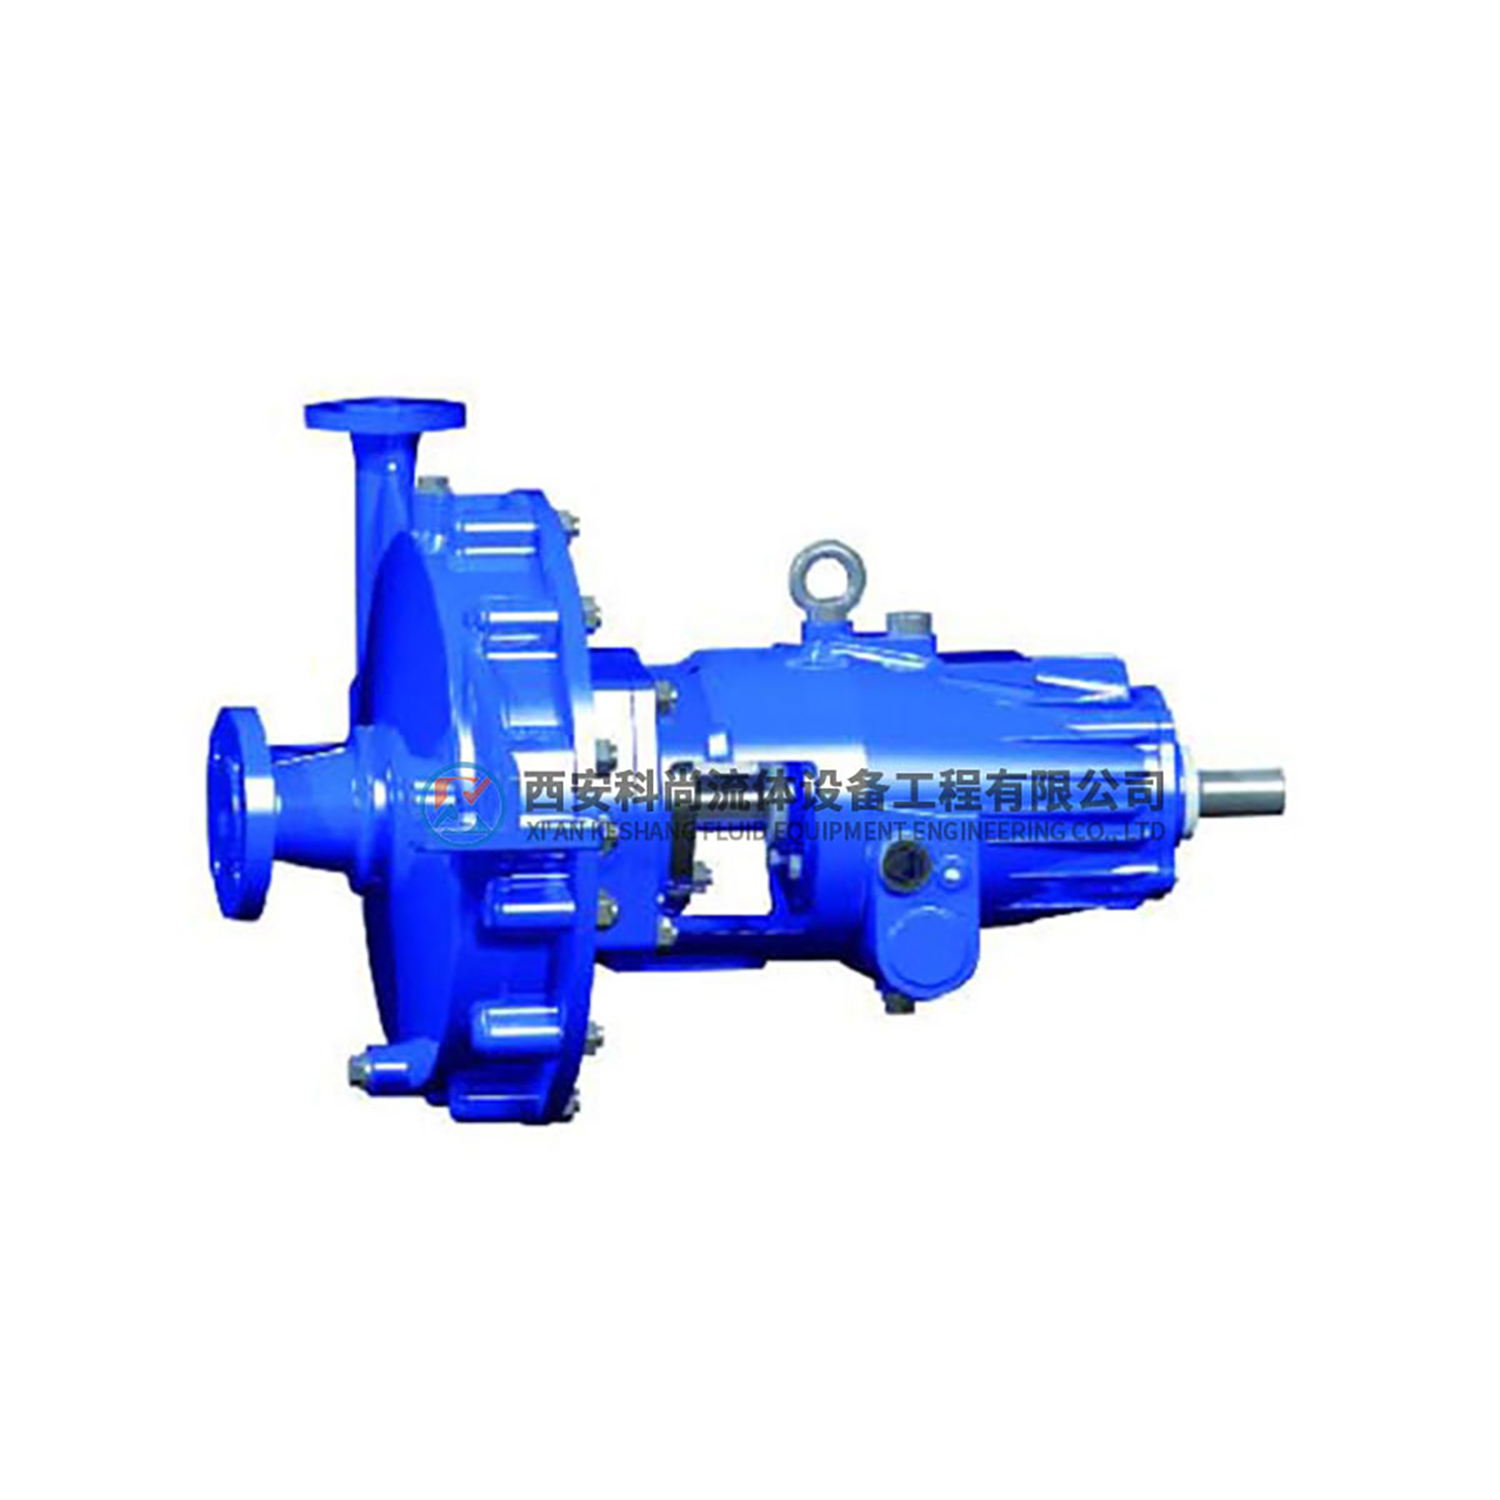 SP type small flow pump